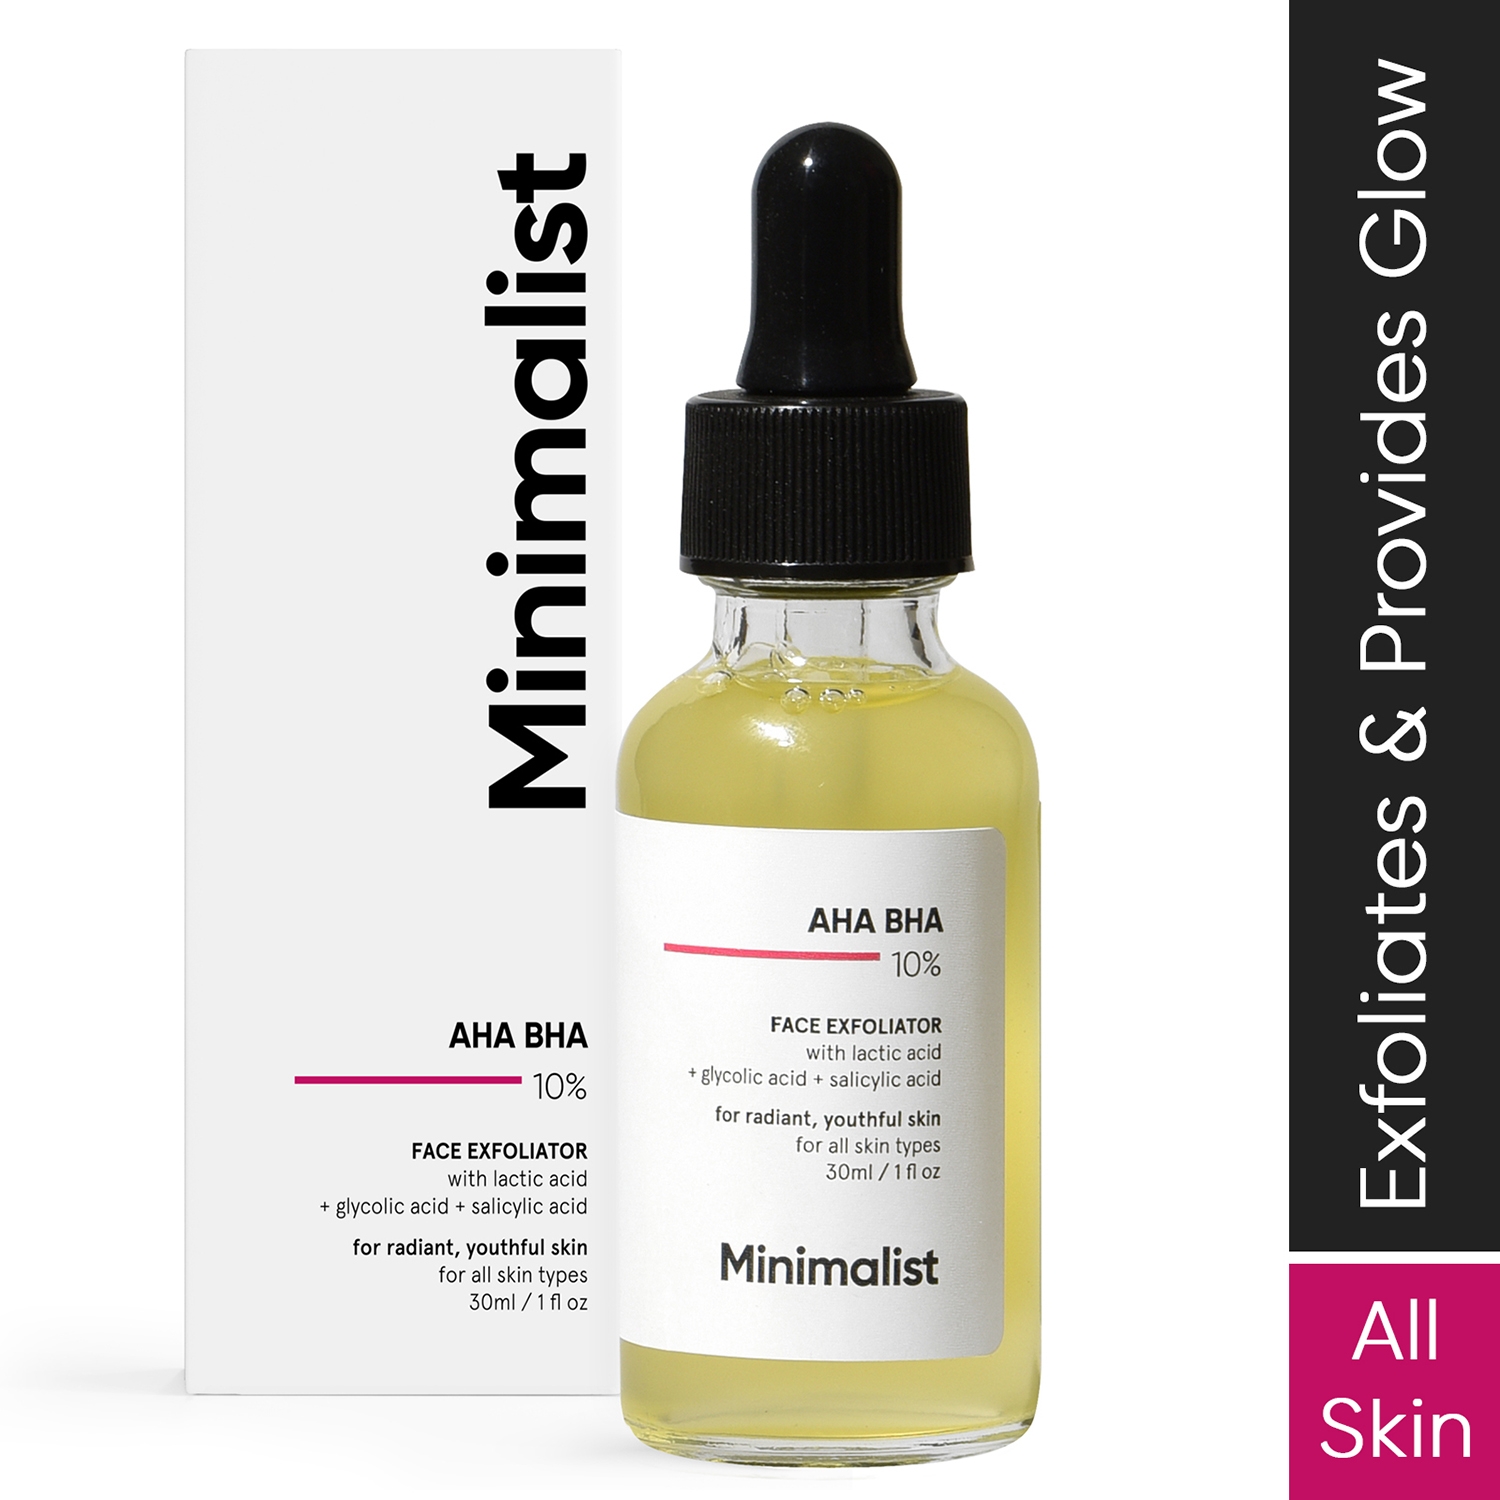 Minimalist | Minimalist AHA BHA 10% Exfoliator with Hyaluronic Acid for Even Tone Younger and Glowing Skin (30ml)